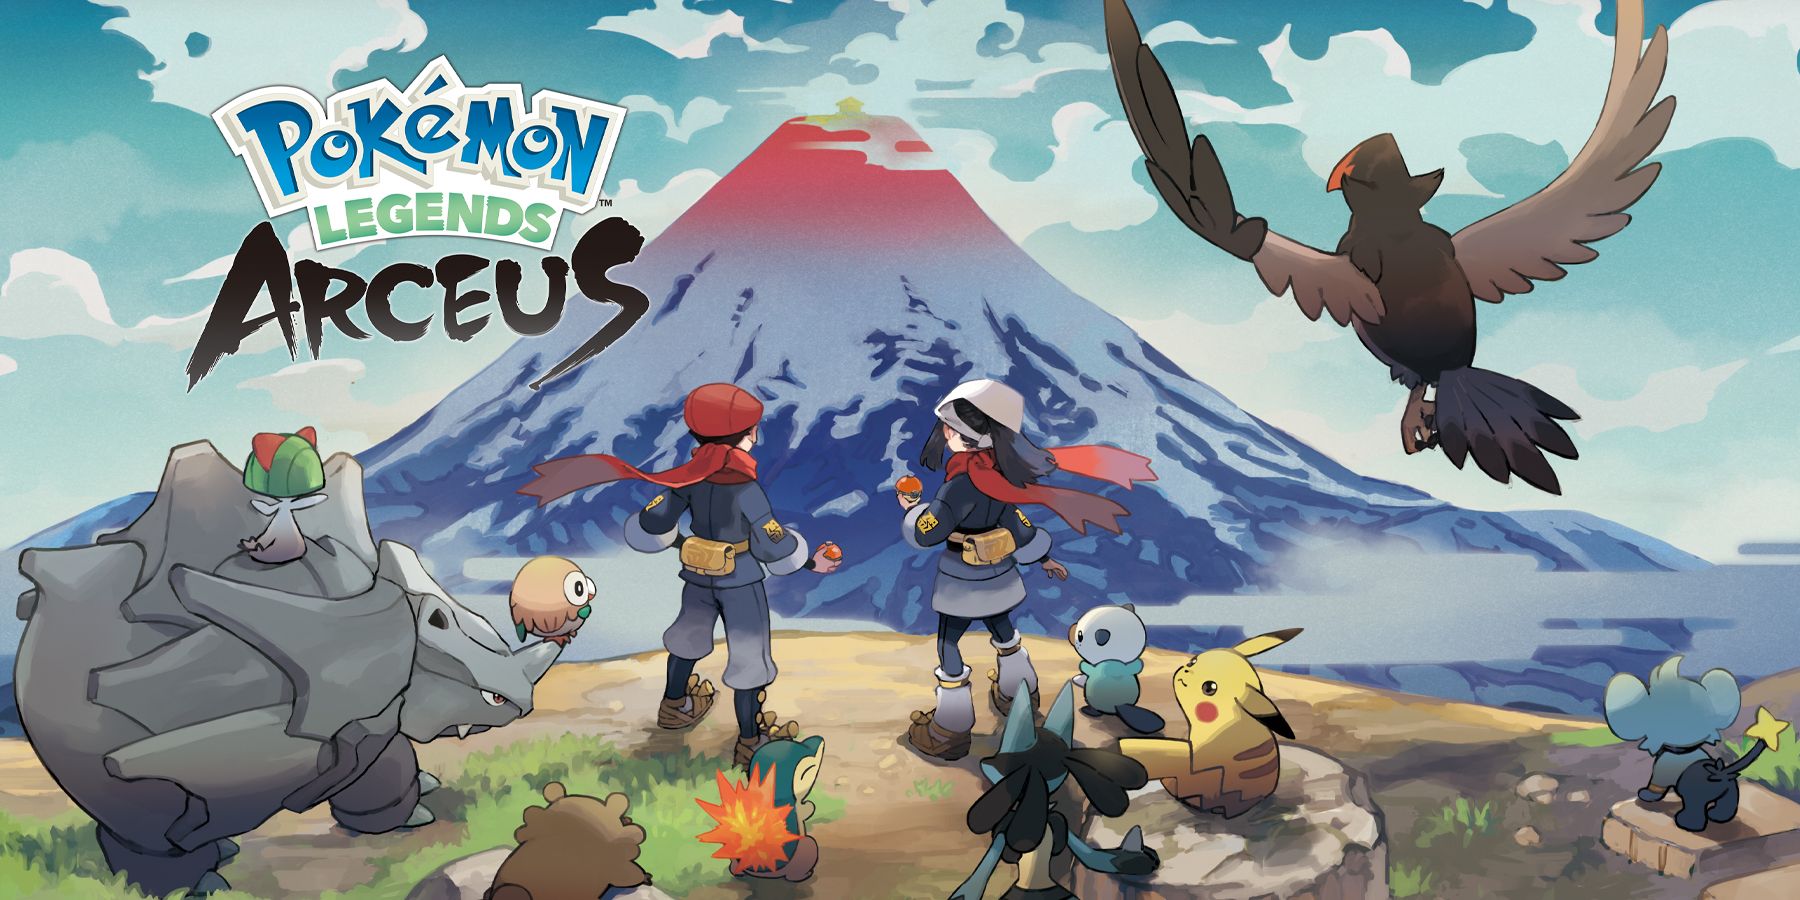 A stylized illustration of Hisui with different Pokemon and the Pokemon Legends: Arceus title logo featured. (From left to right, Rhydon with a Ralts sitting on its back and a Rwolet on its horn, Bidoof, Cyndaquil, Lucario, Oshawott, Pikachu, Staraptor, and Shinx. There are also two Pokemon trainers in the center of the image.)